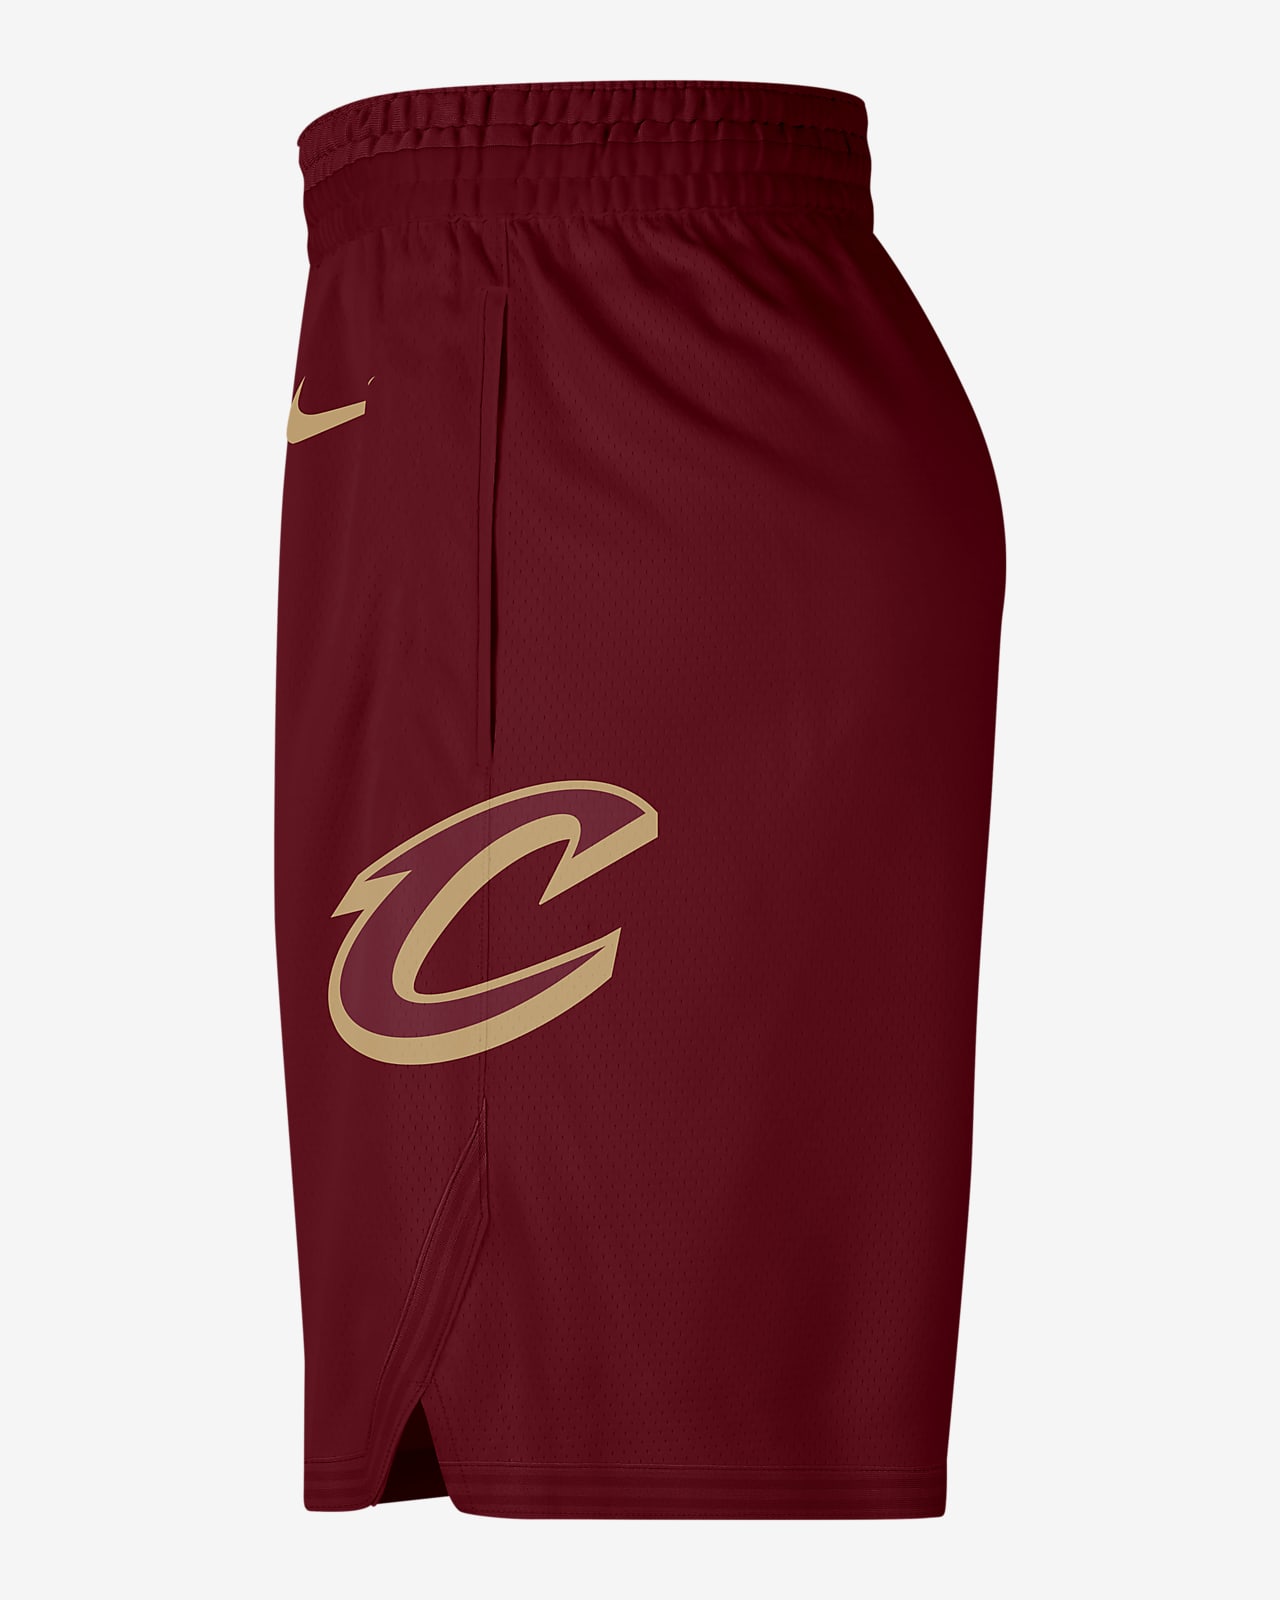 Nike Cleveland Cavaliers City Edition gear available now